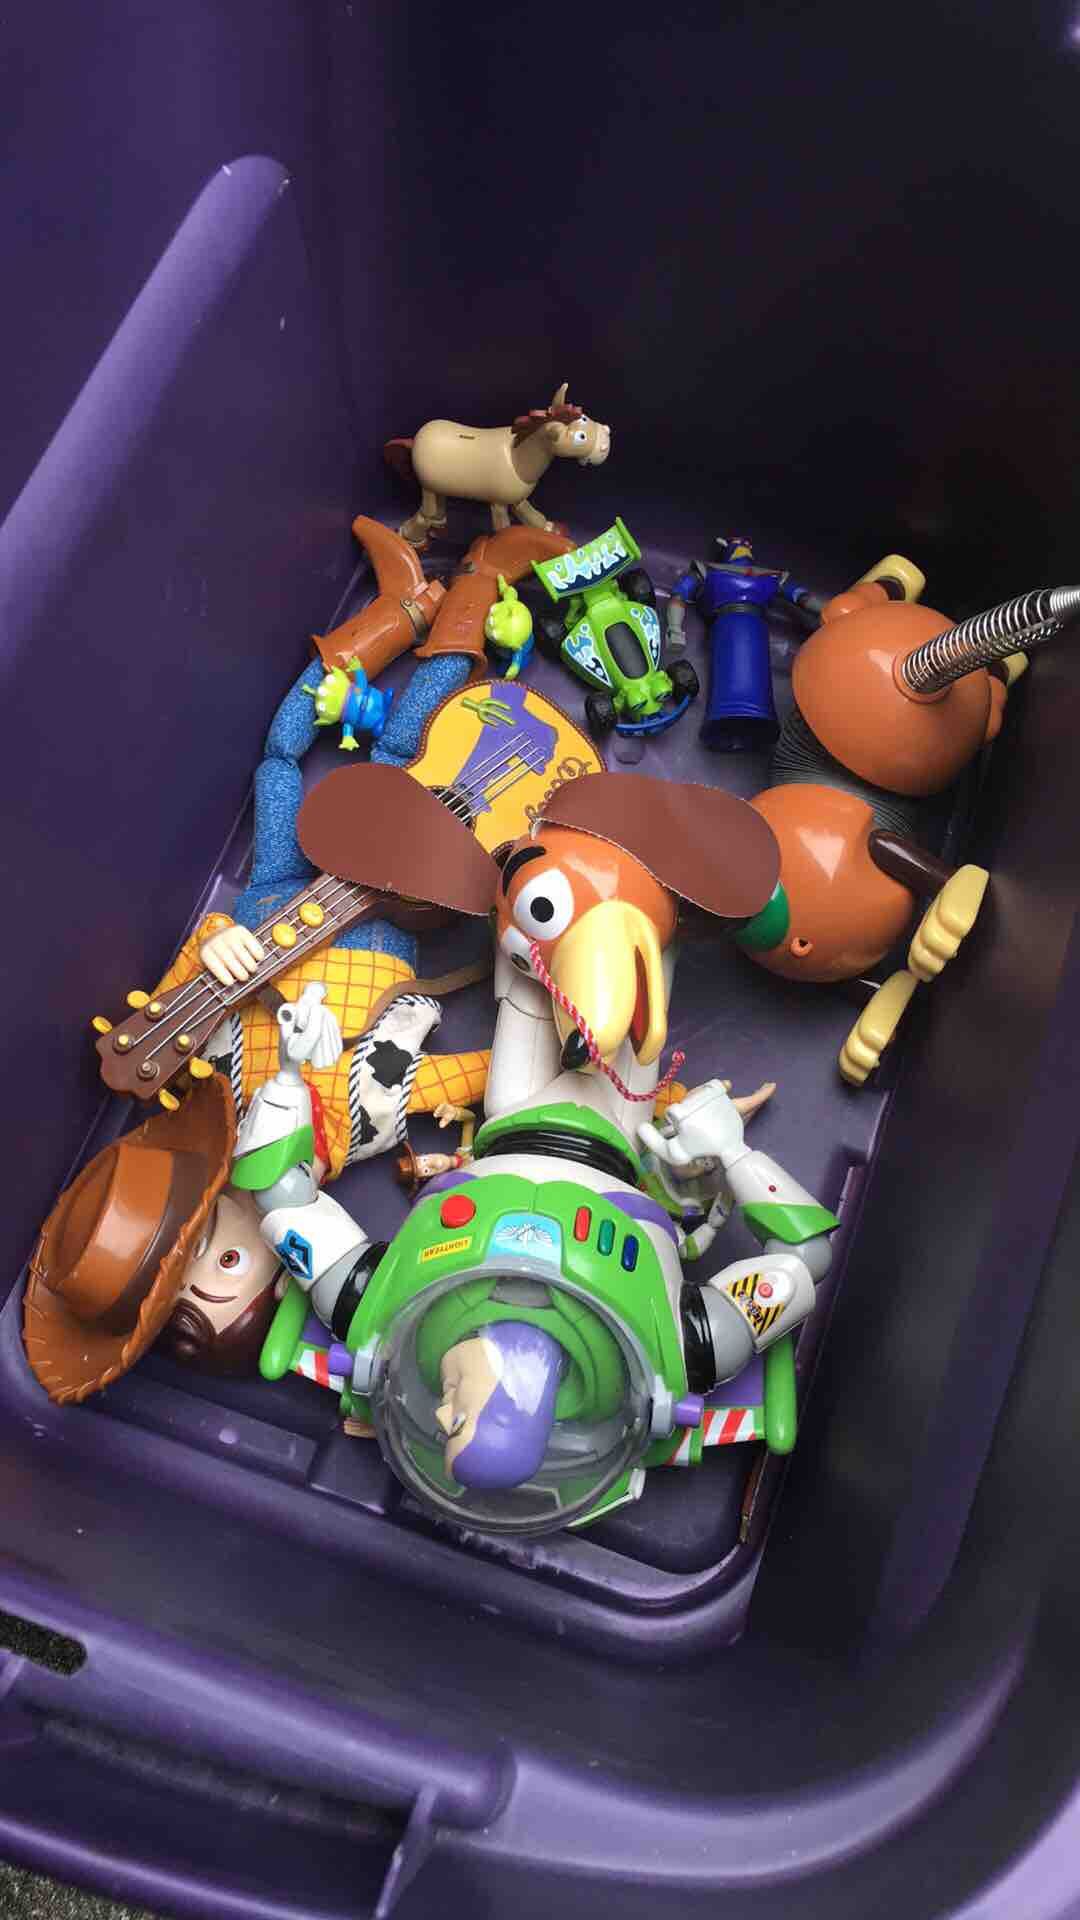 Boxing up the kids Toy Story toys feels a little wrong.